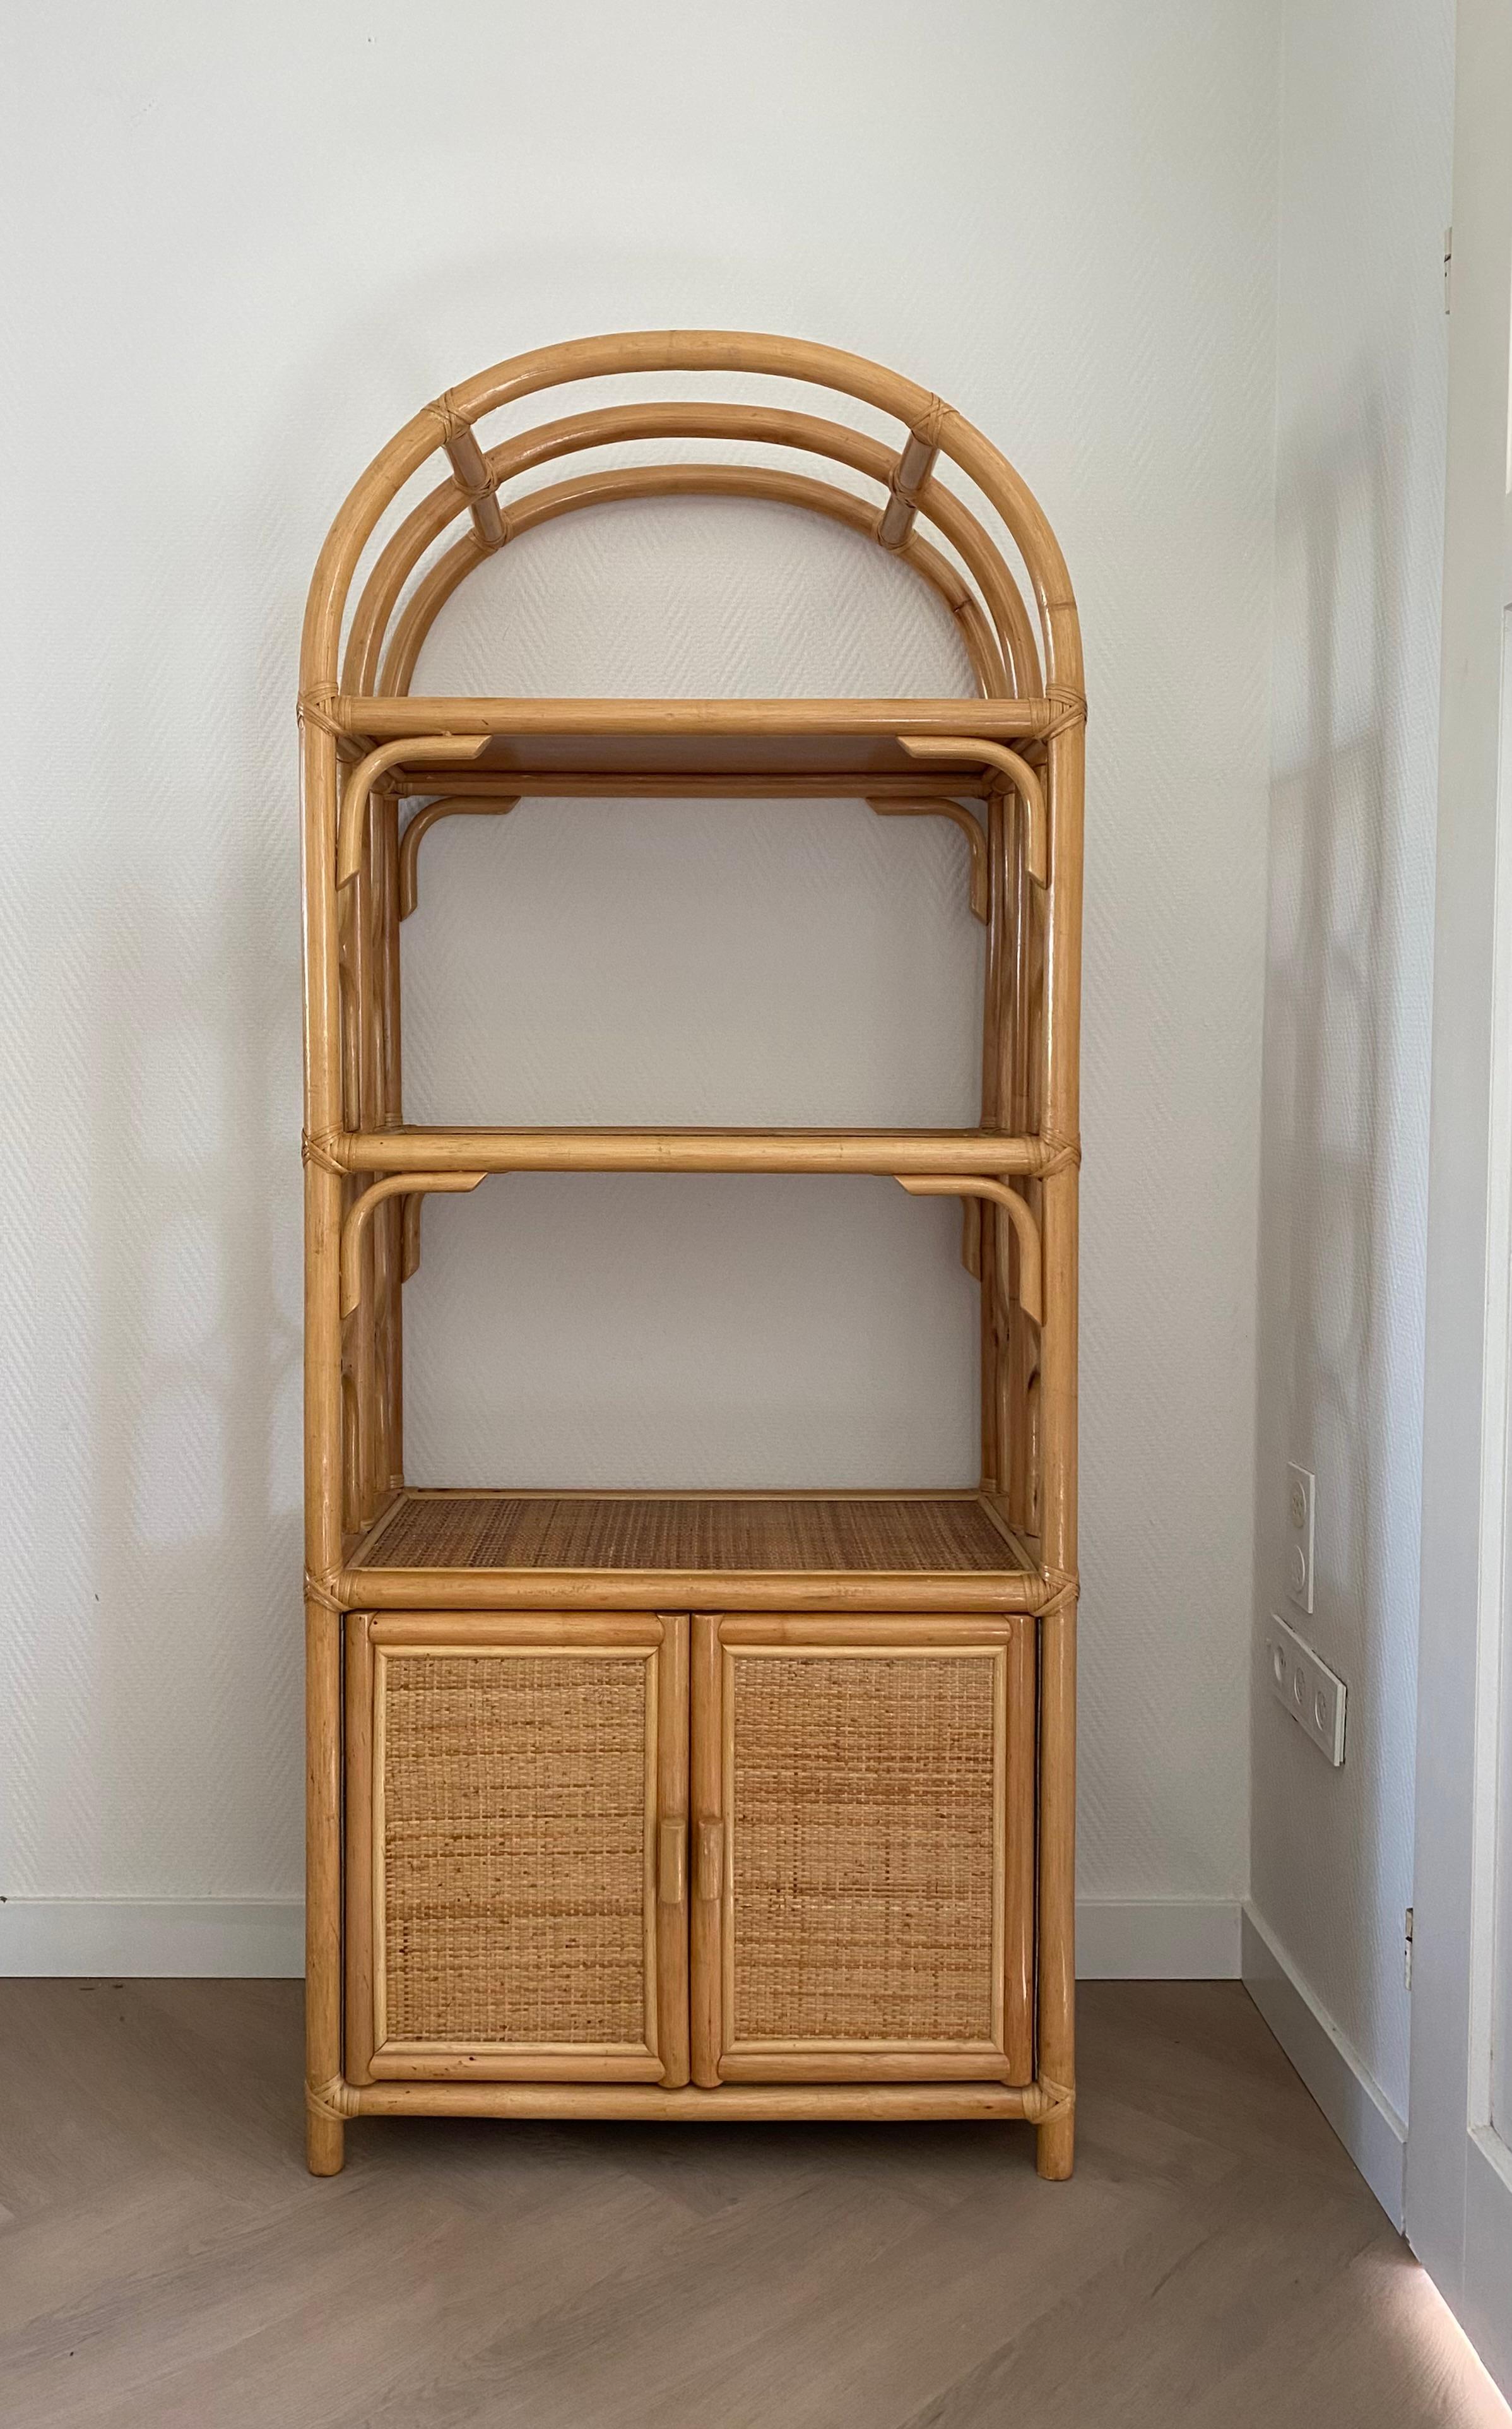 Rattan/Wicker and Cane Bookcase/Cabinet from the late 20th Century.  The shelf inside, which was probably placed by former owners, is missing but easy to replace if needed. The piece remains in good condition with wear consistent with age and use.